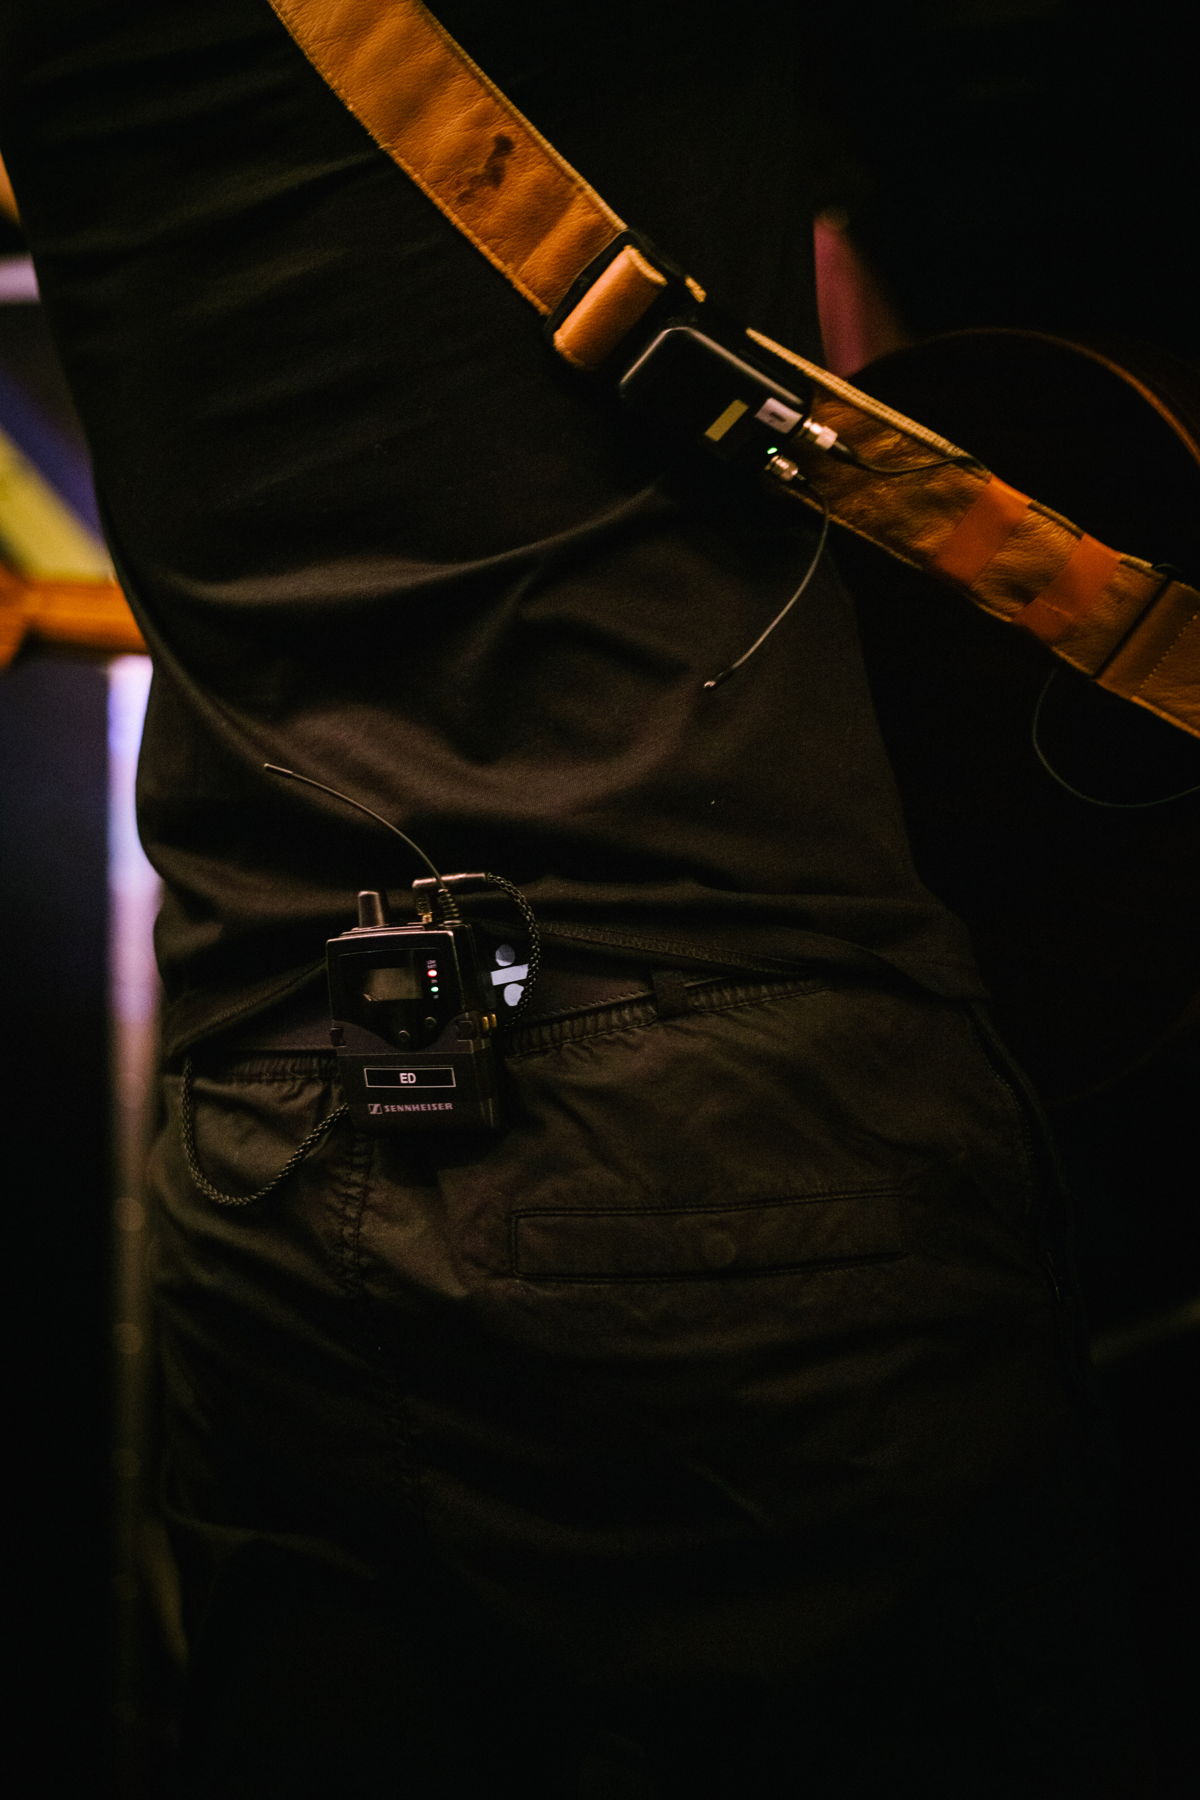 The SK 6212 mini-transmitter is attached to the guitar strap.  Photo credit: Zak Walters